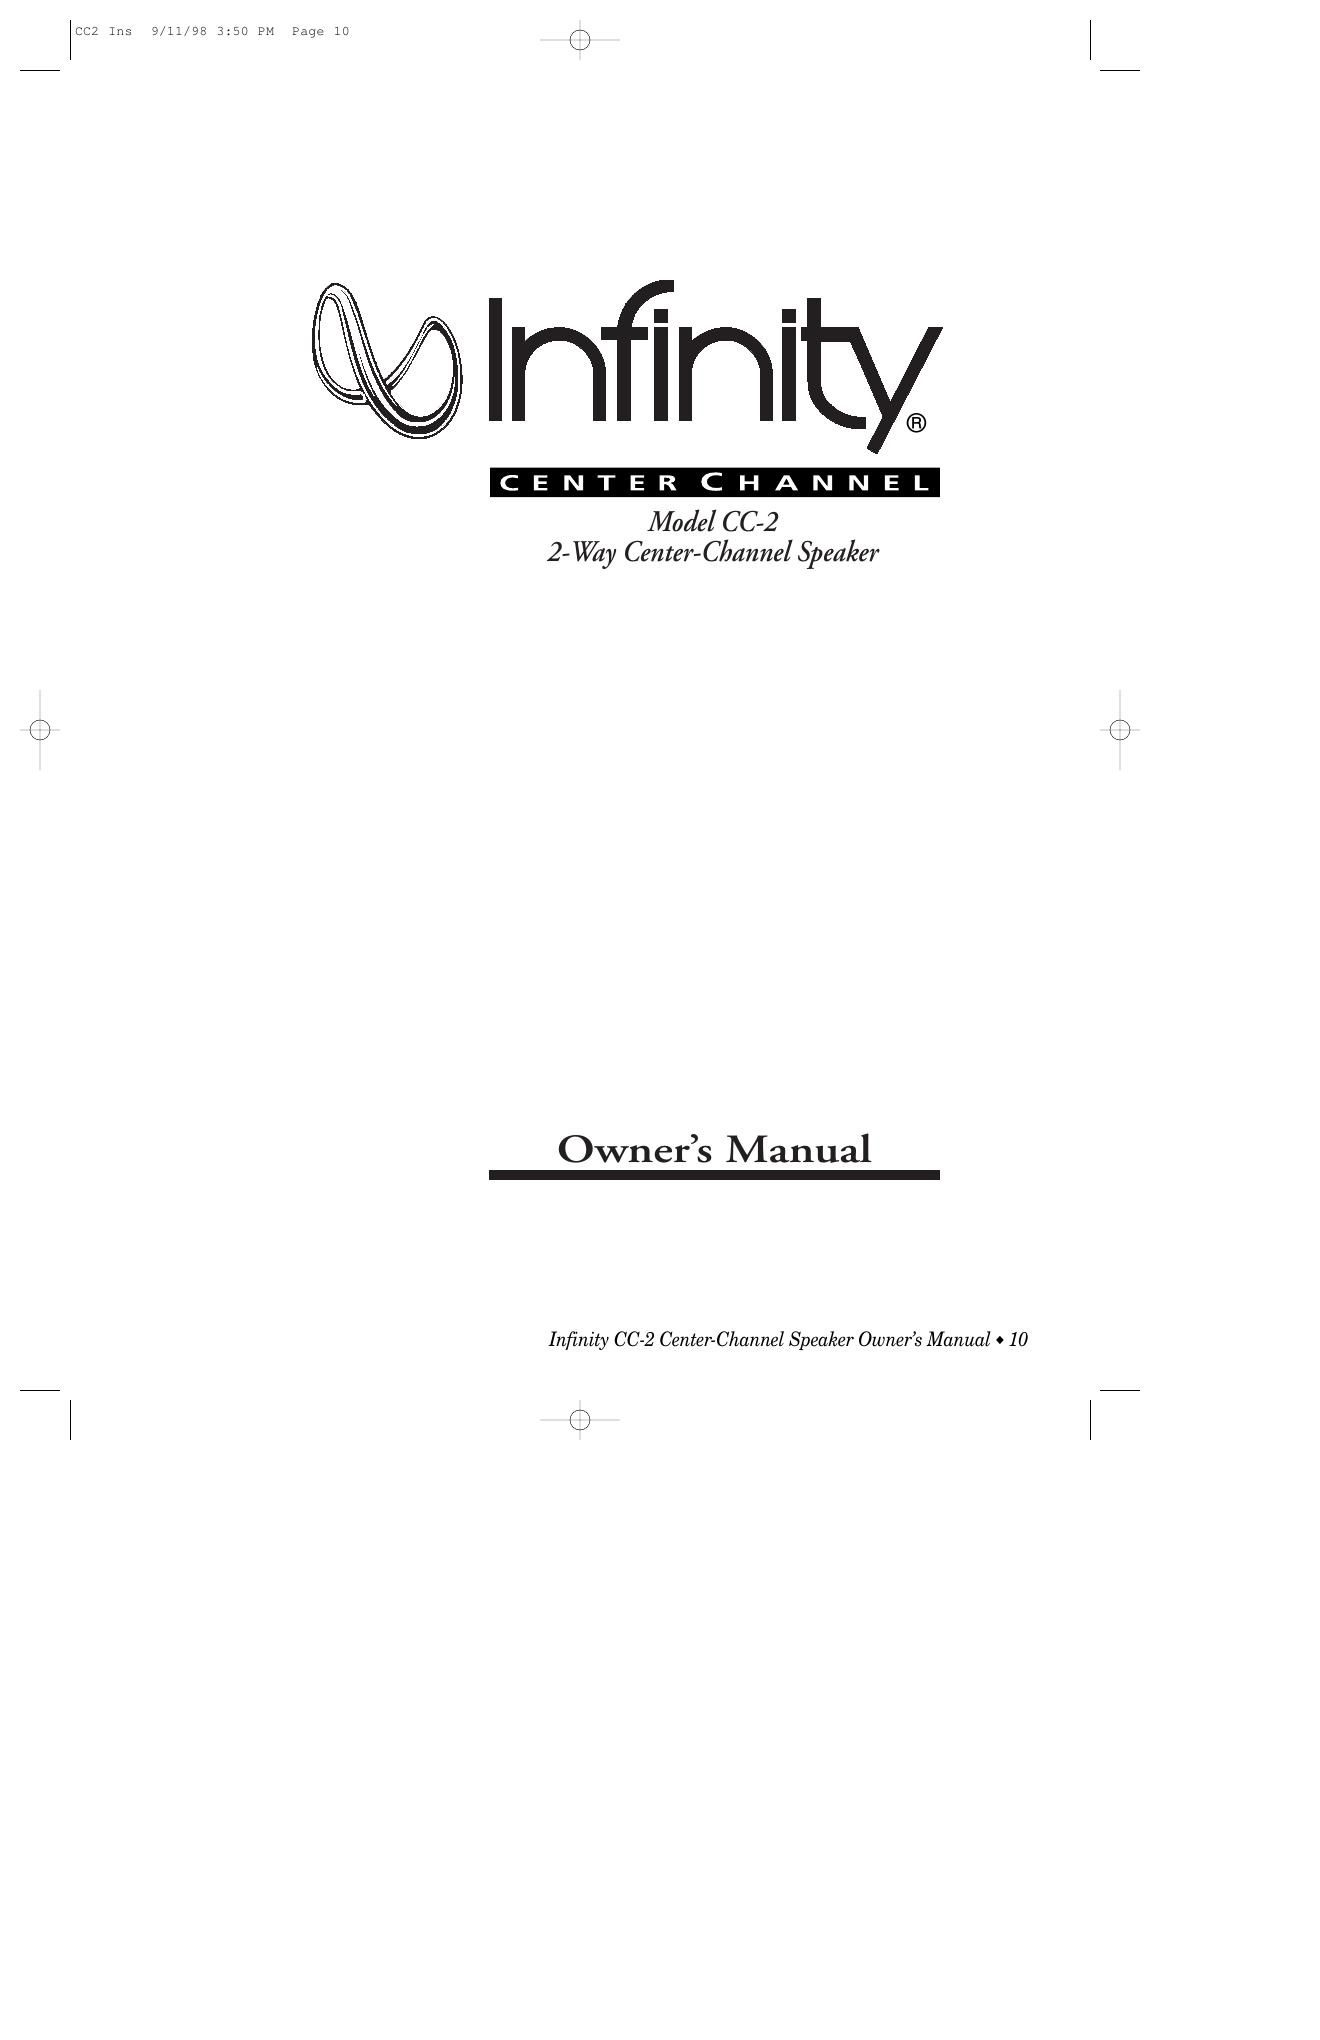 infinity cc2 ownersmanual